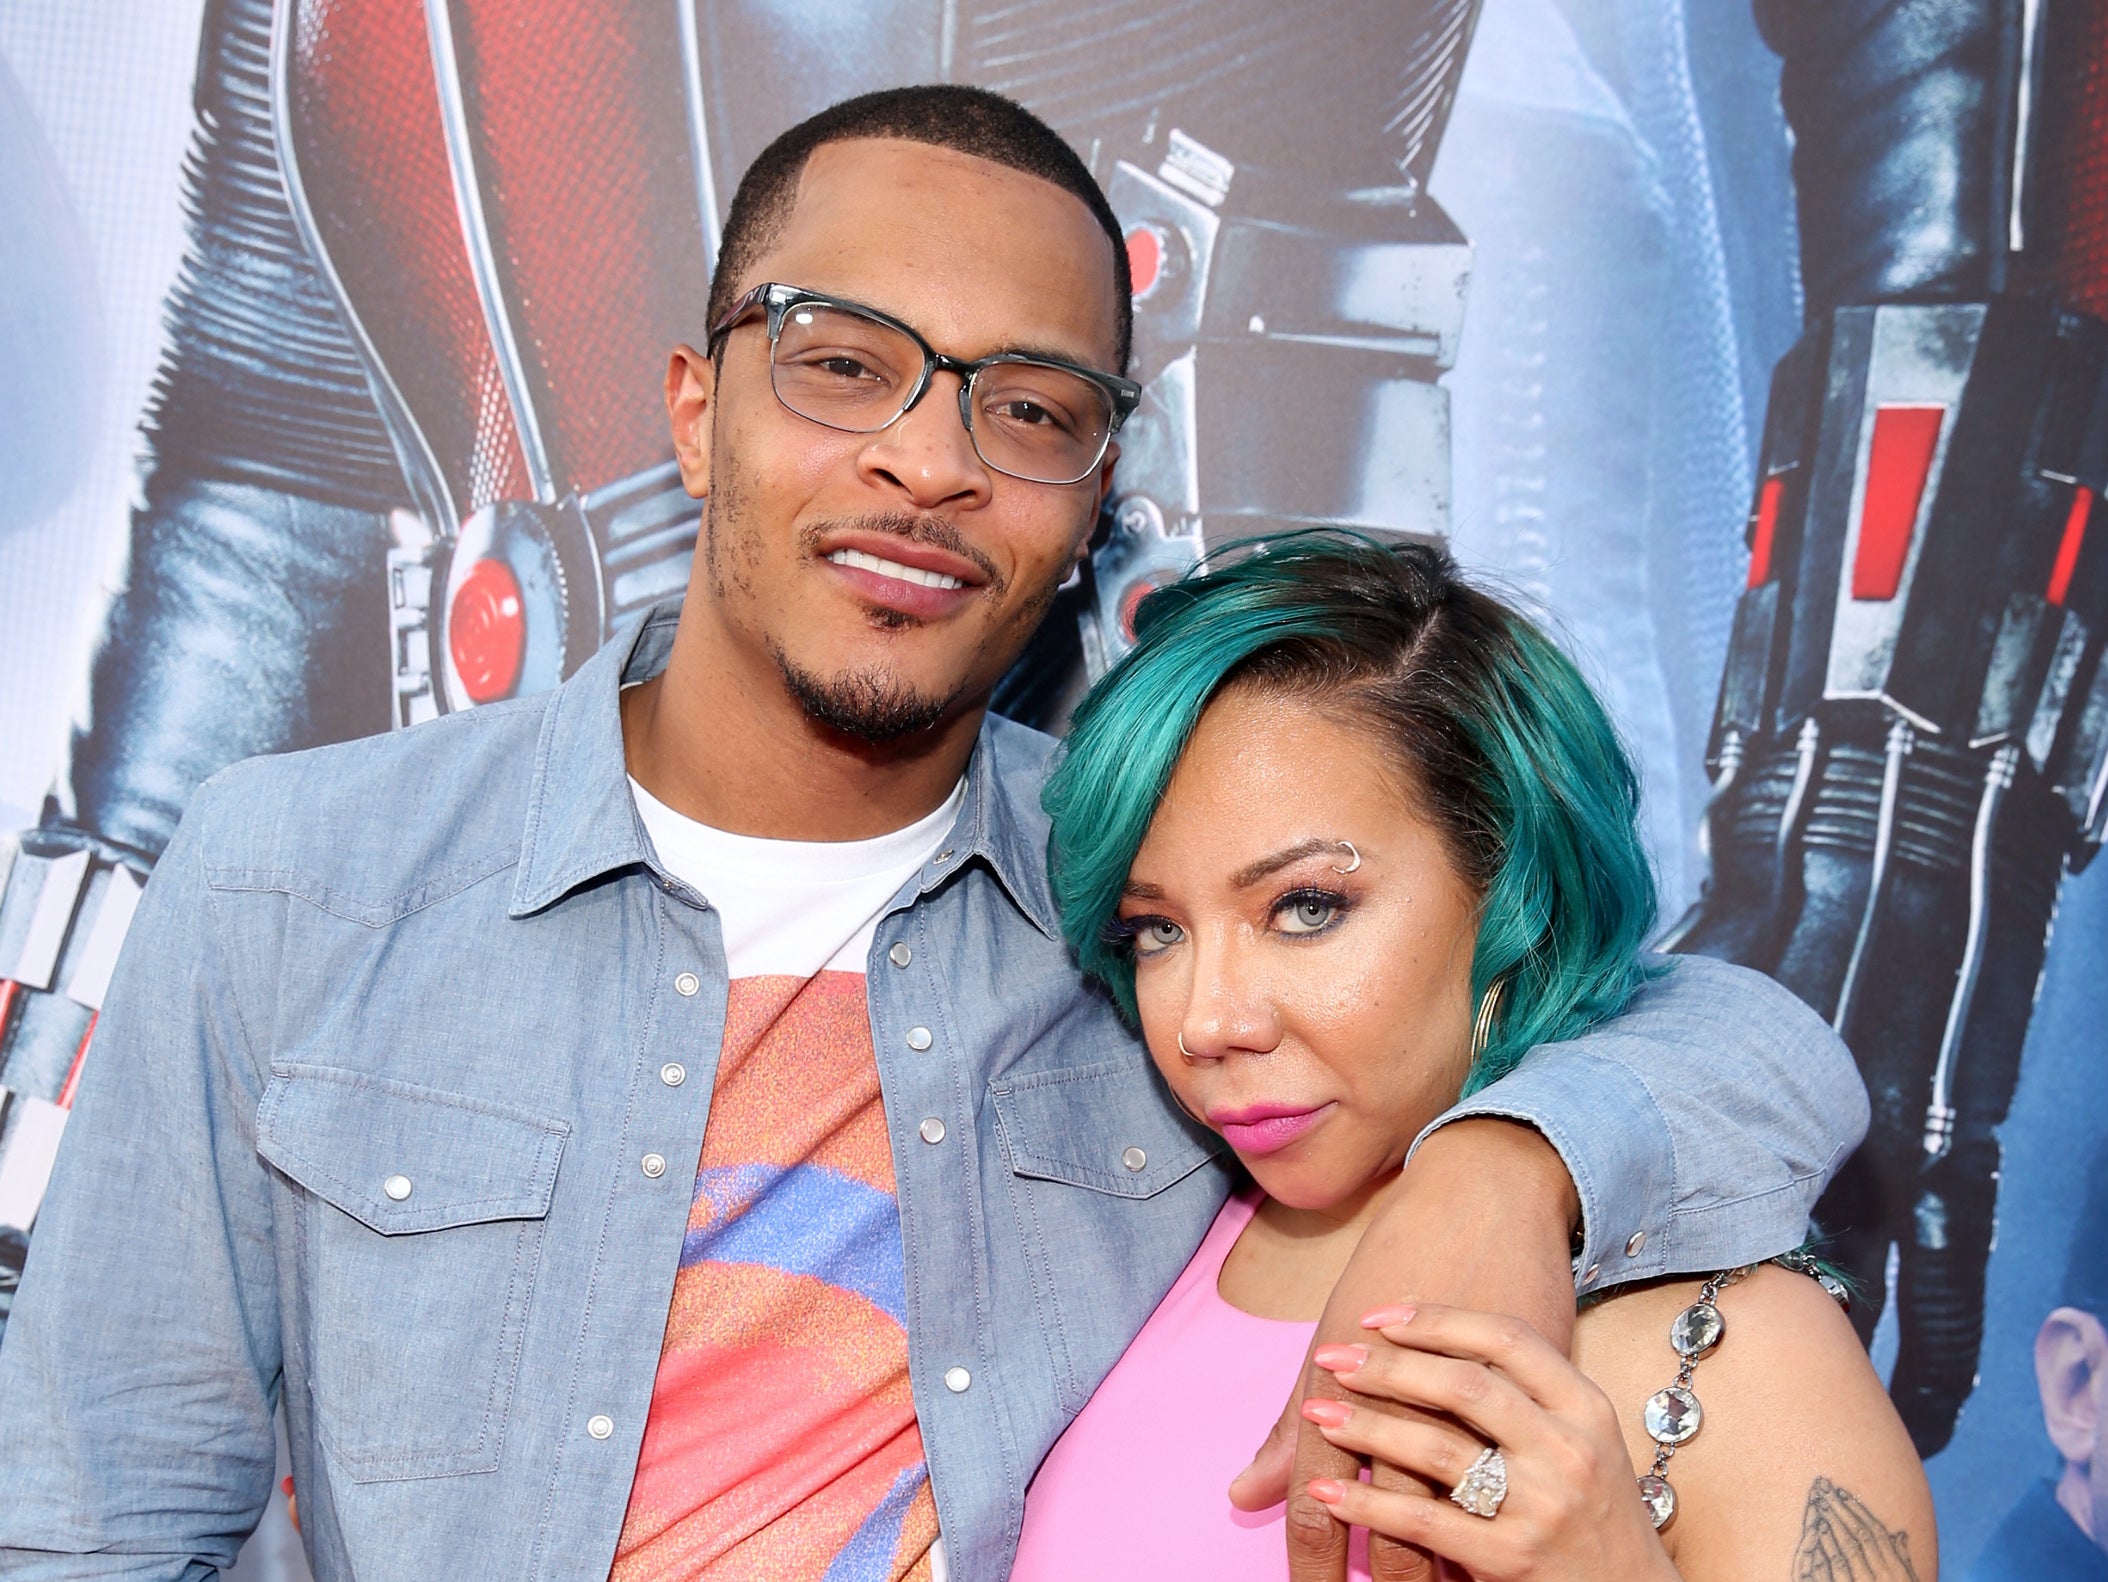 Lawyer calls for investigation into rapper TI and wife Tiny over sexual assault allegations The Independent photo photo